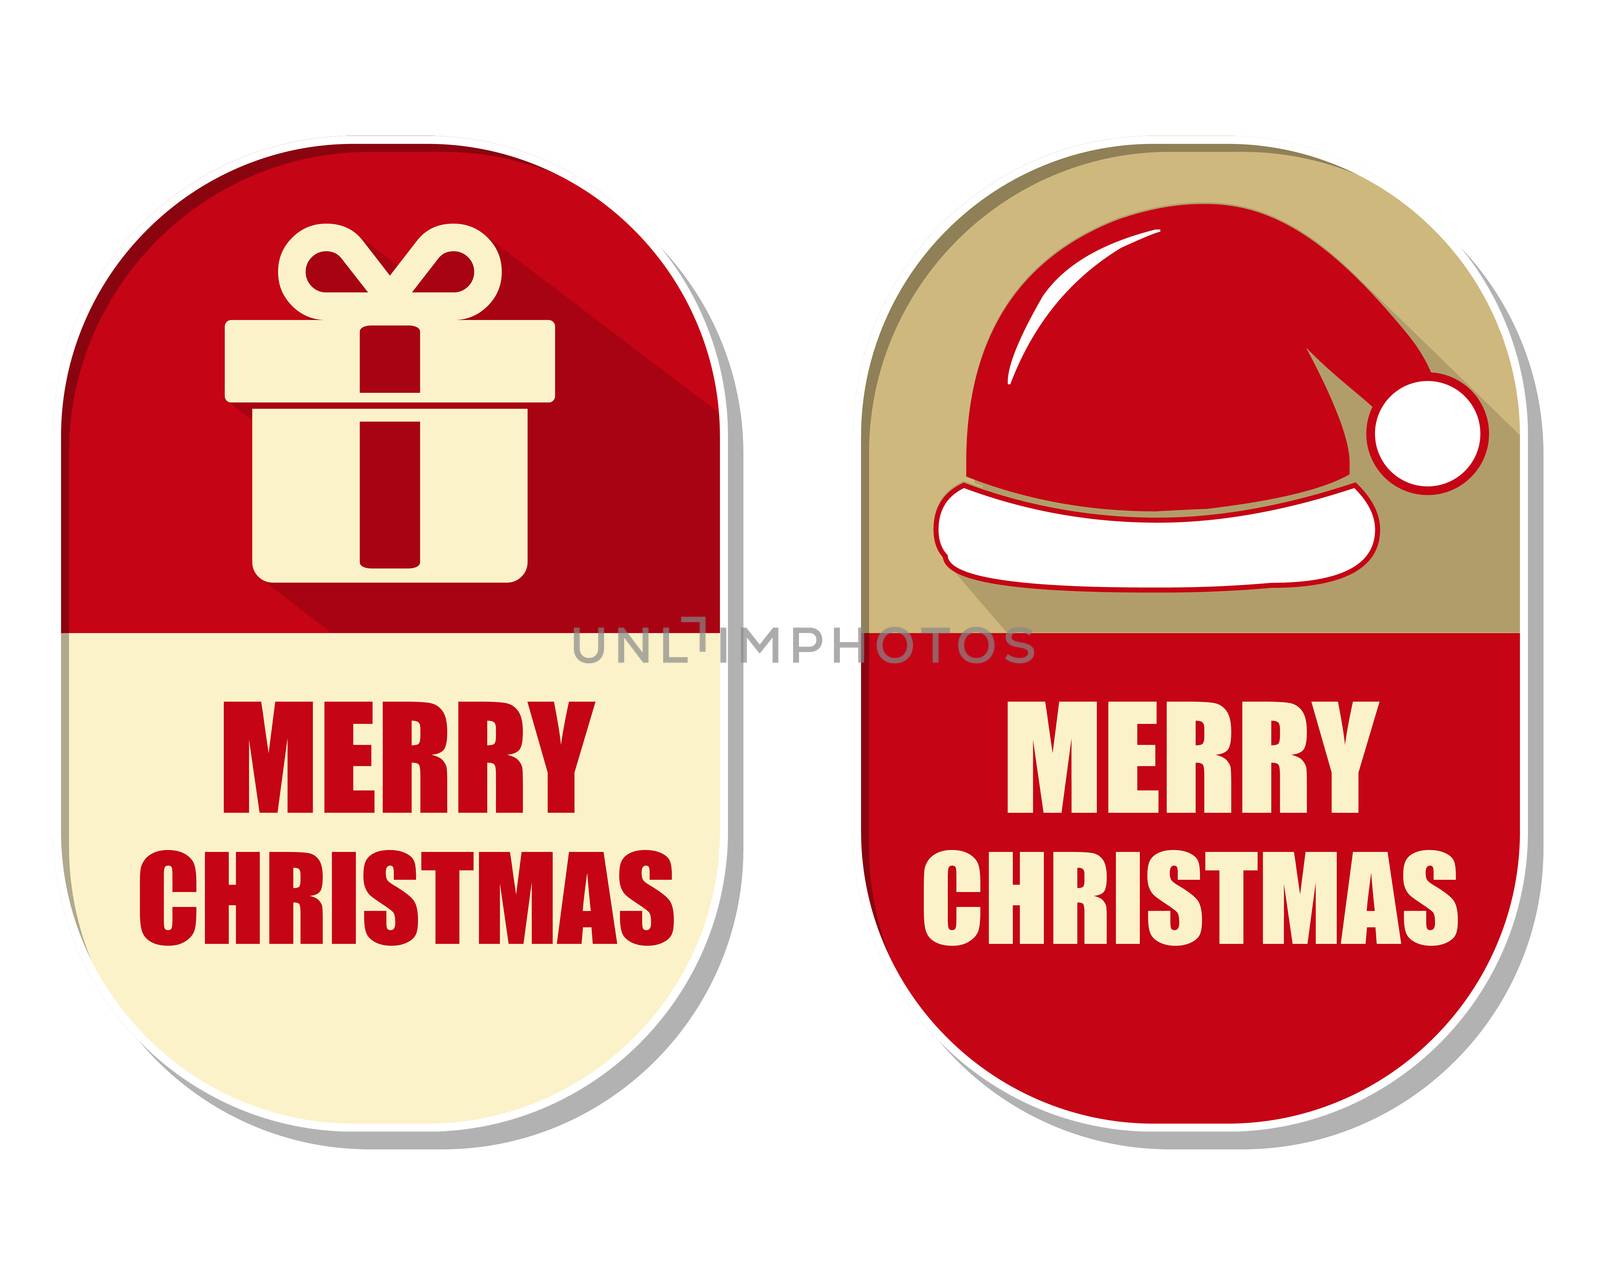 merry christmas with gift sign and red hat, two elliptic flat design labels with symbols, holiday concept